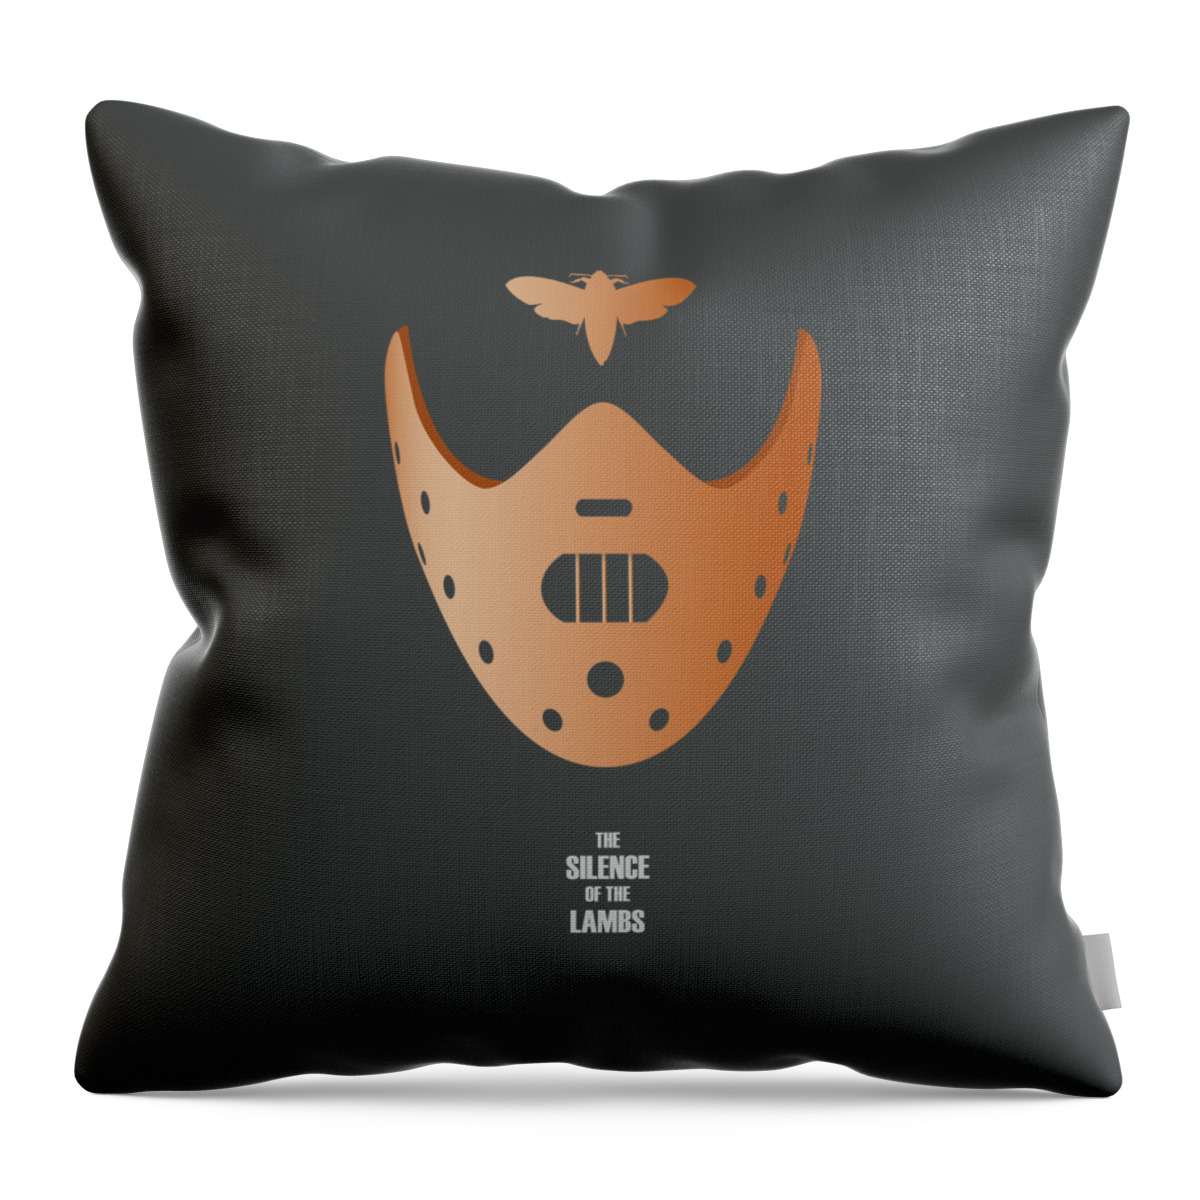 Movie Poster Throw Pillow featuring the digital art The Silence of the Lambs - Alternative Movie Poster by Movie Poster Boy